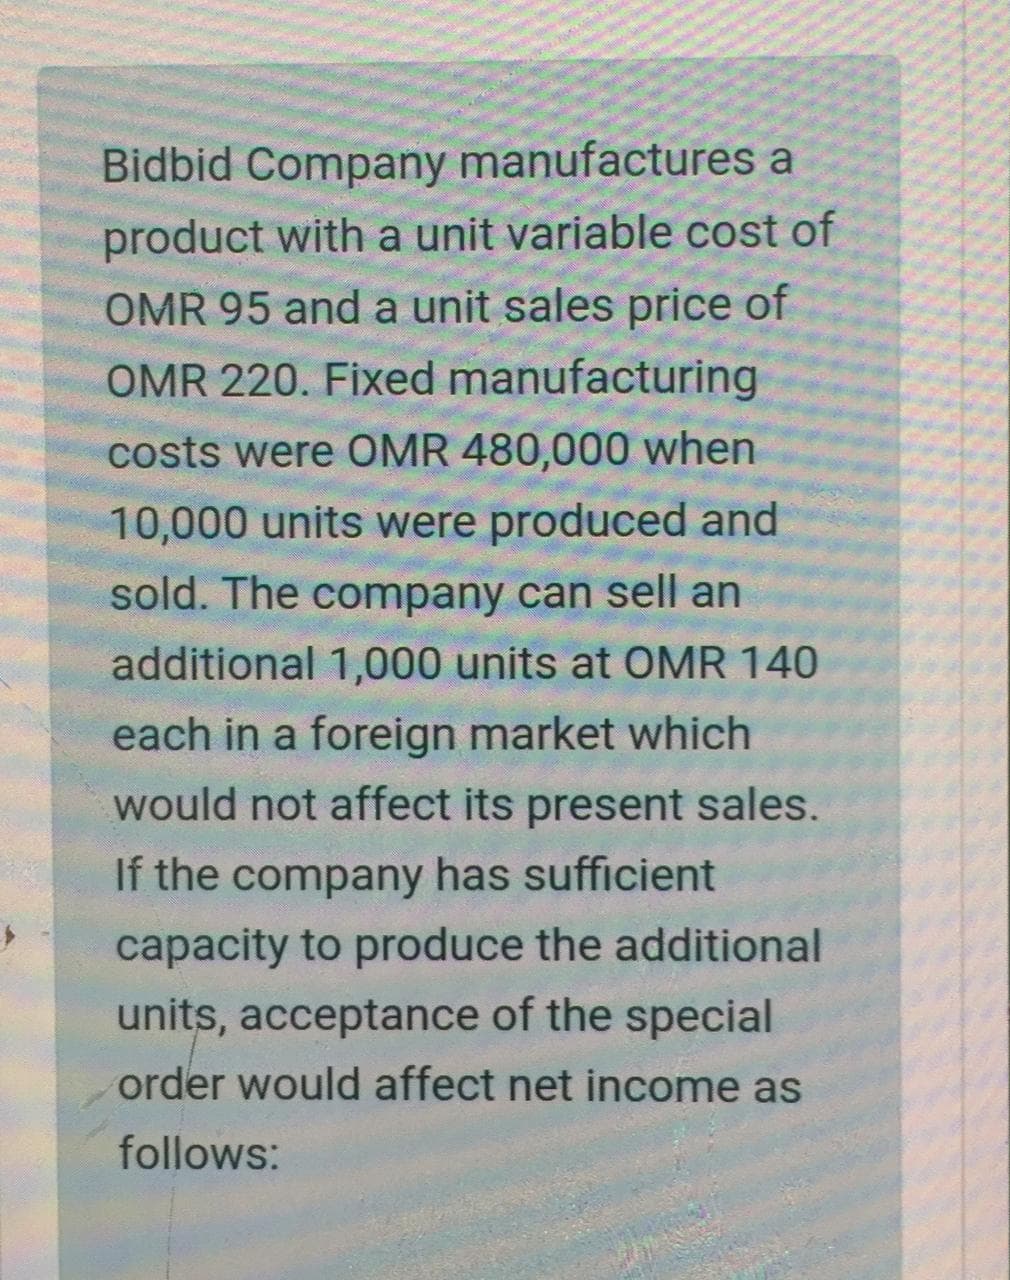 Bidbid Company manufactures a
product with a unit variable cost of
OMR 95 and a unit sales price of
OMR 220. Fixed manufacturing
costs were OMR 480,000 when
10,000 units were produced and
sold. The company can sell an
additional 1,000 units at OMR 140
each in a foreign market which
would not affect its present sales.
If the company has sufficient
capacity to produce the additional
units, acceptance of the special
order would affect net income as
follows:
